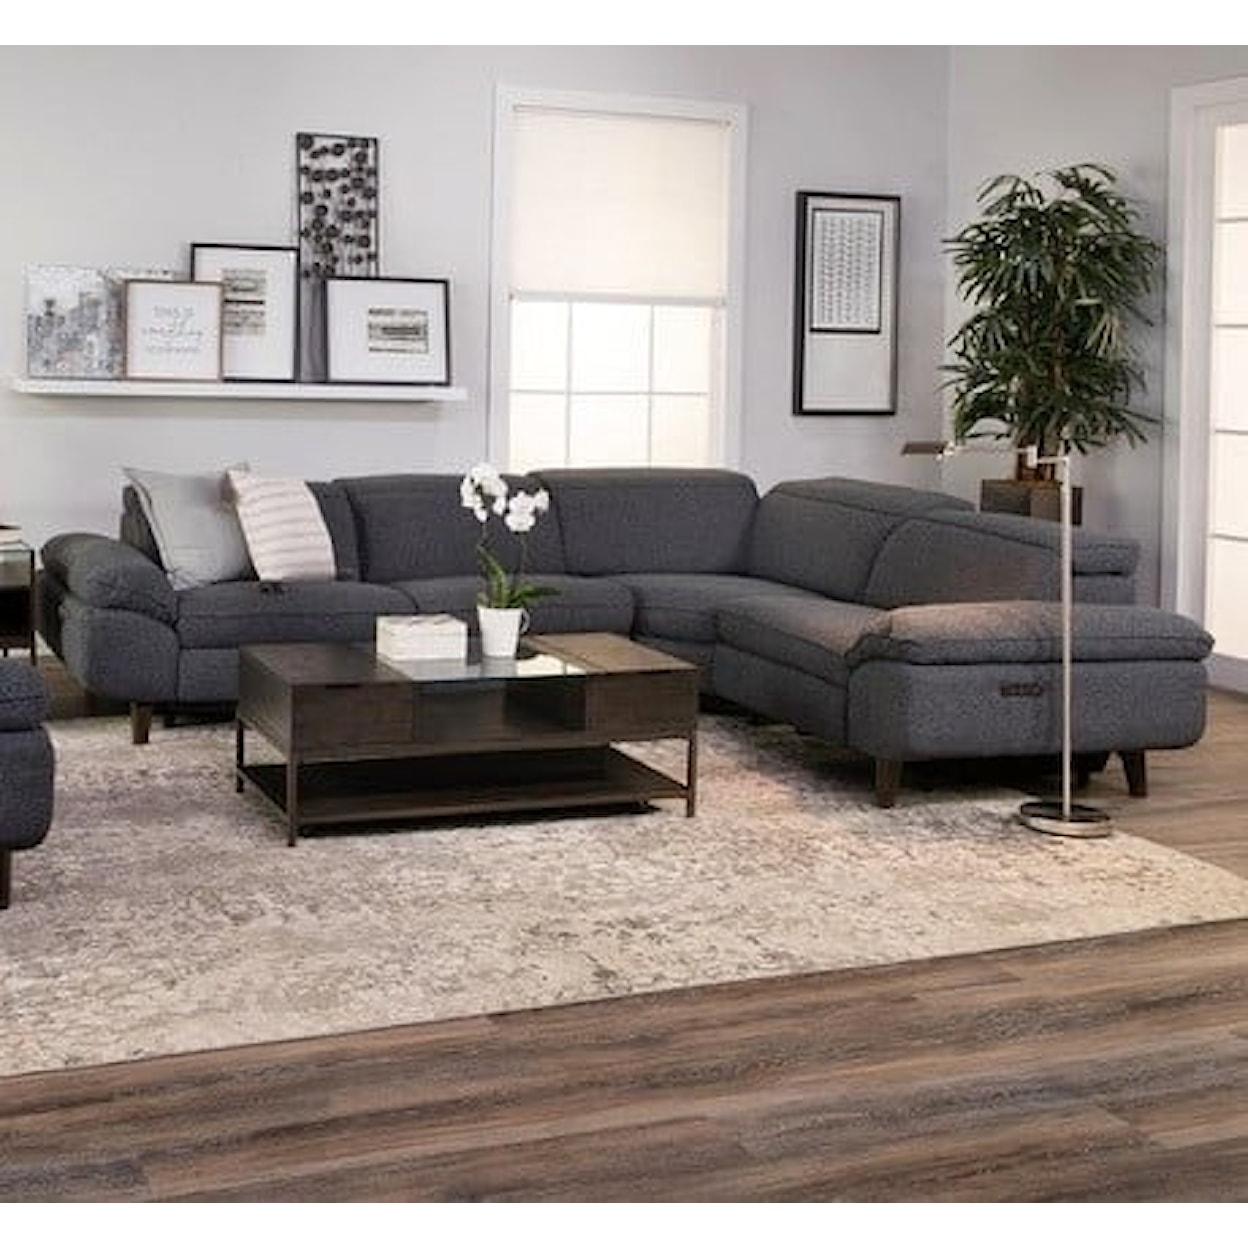 Stitch Ethan 4 Piece 2 Power Recliner Sectional